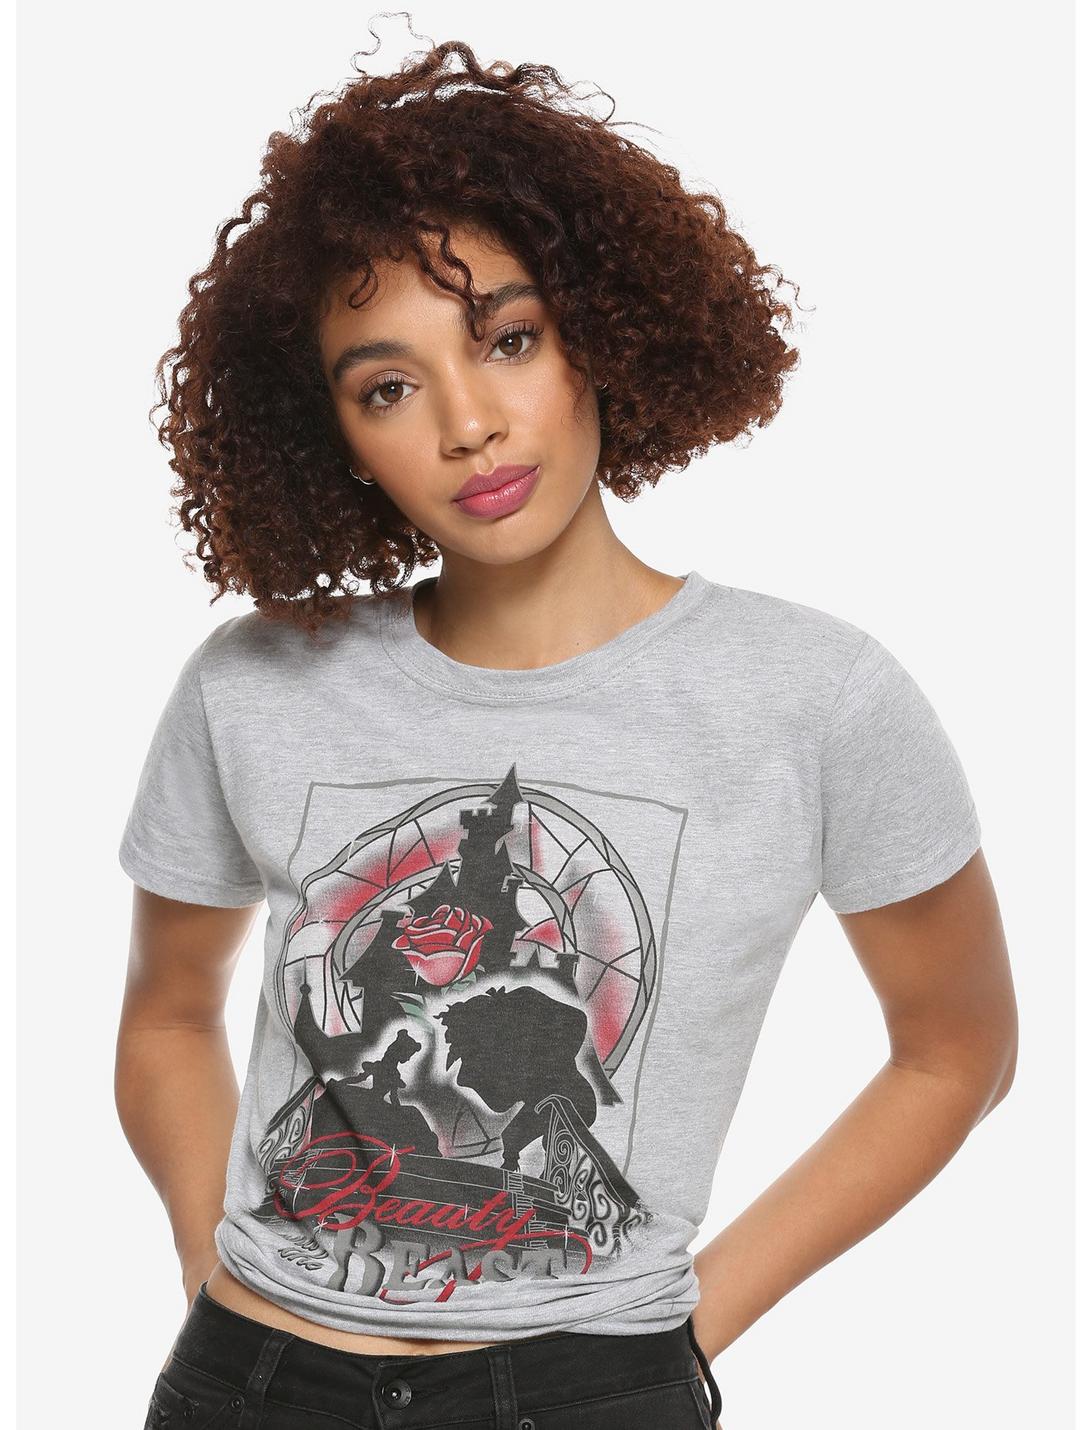 Disney Beauty And The Beast Silhouette Stained Glass Girls T-Shirt, MULTI, hi-res